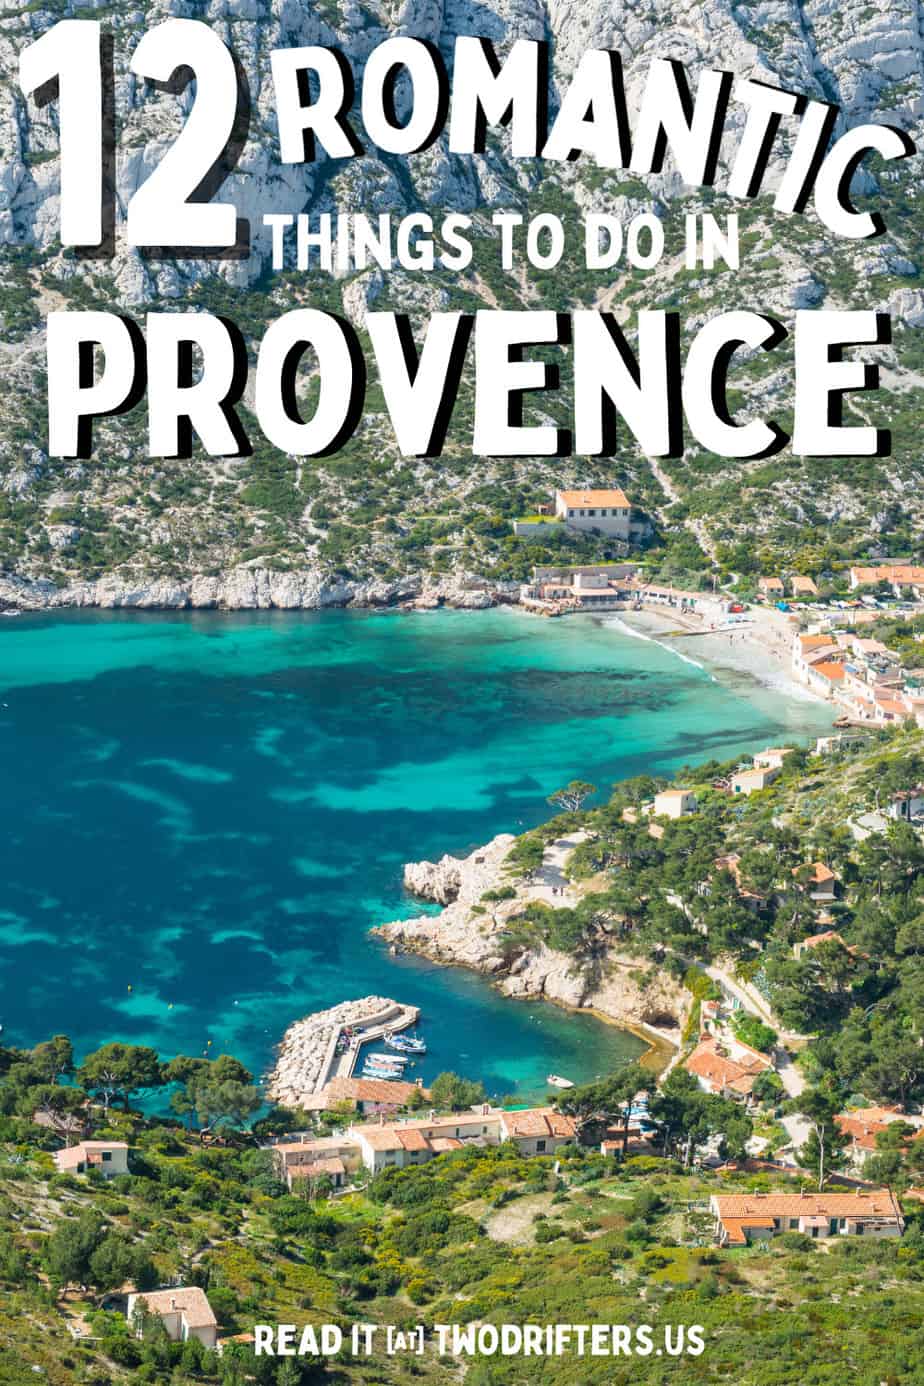 Pinterest social share image that says "12 Romantic things to do in Provence."